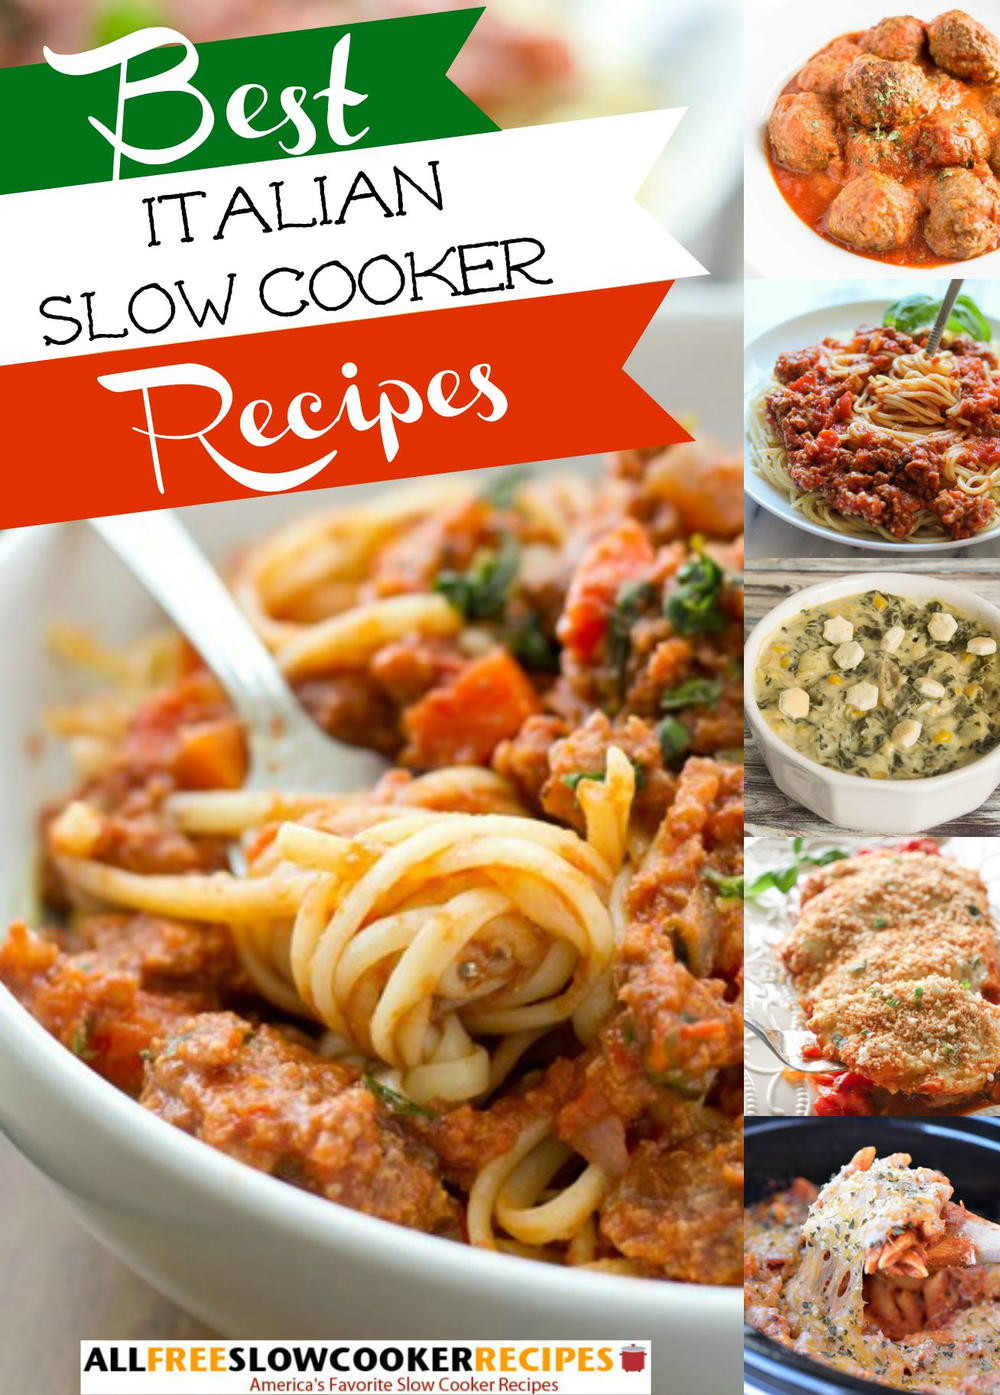 Slow Cooker Main Dishes
 13 Easy Italian Recipes for Slow Cooker Dinners